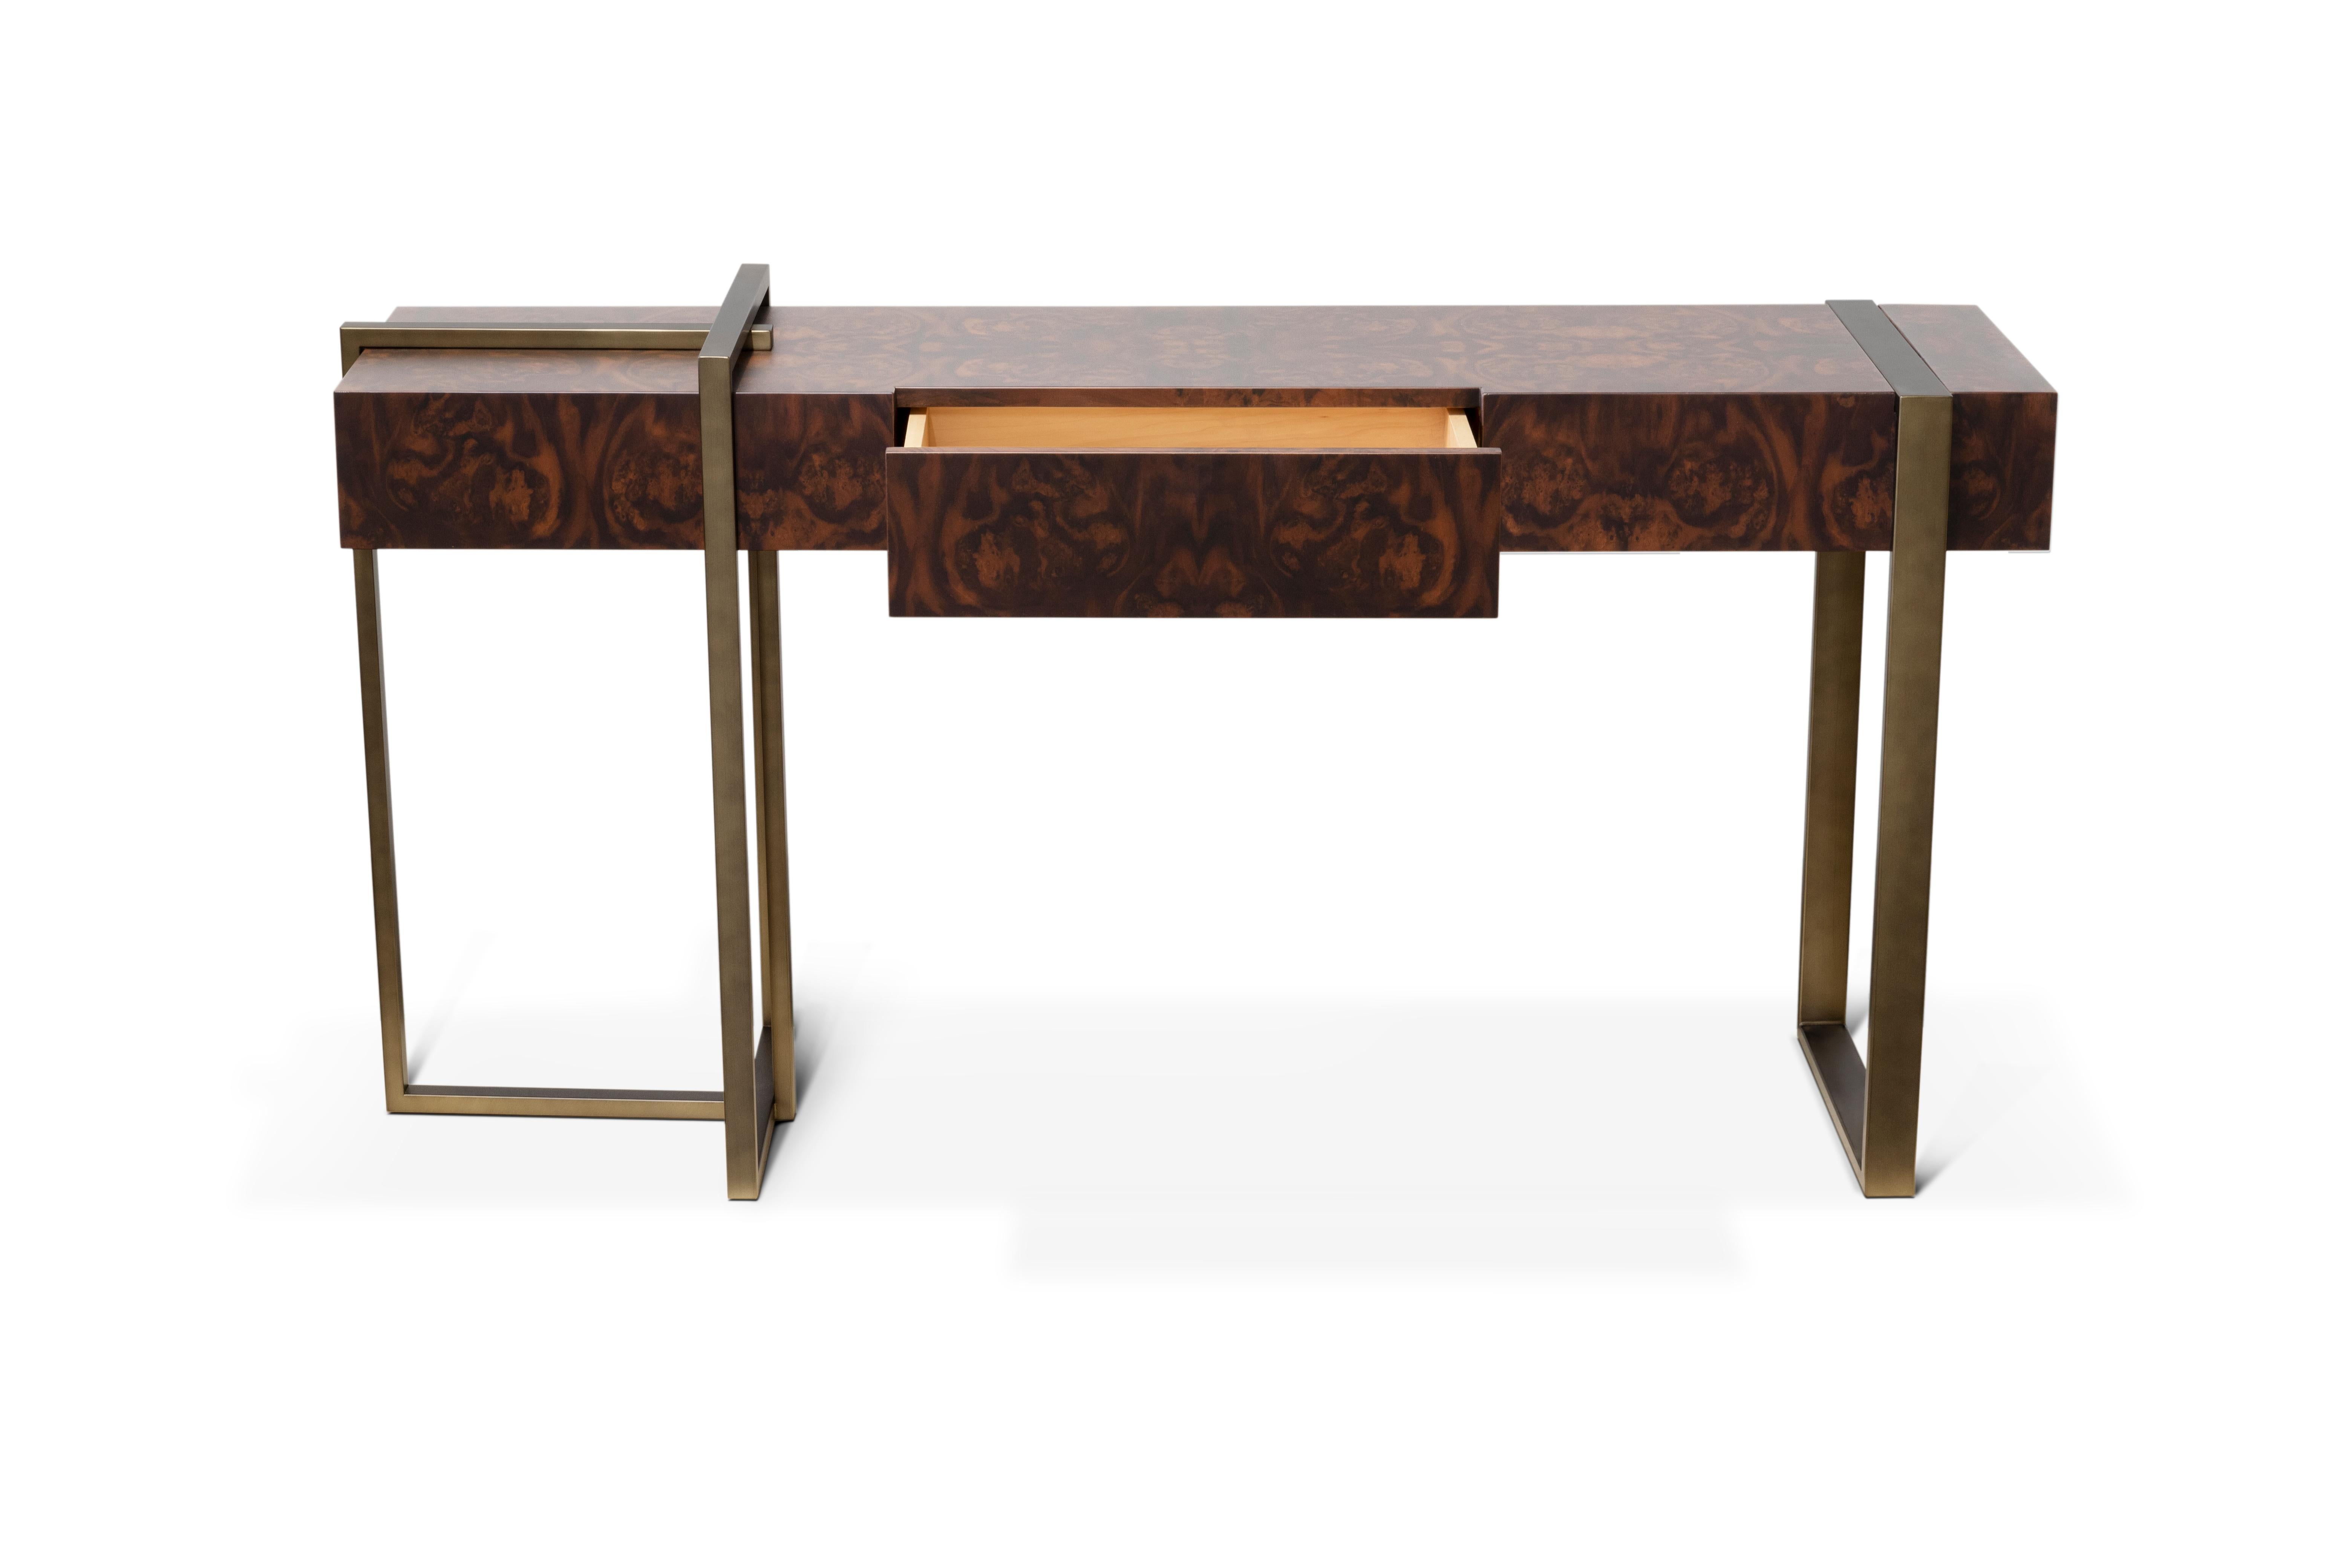 Minimalist Lungo Walnut Veneer Console by Caffe Latte

A Minimalist Lungo Walnut Veneer Console by Caffe Latte, that is charaterized for having strict and harsh lines that combined with the walnut root matte wood veneer and the epoxy iron bronze